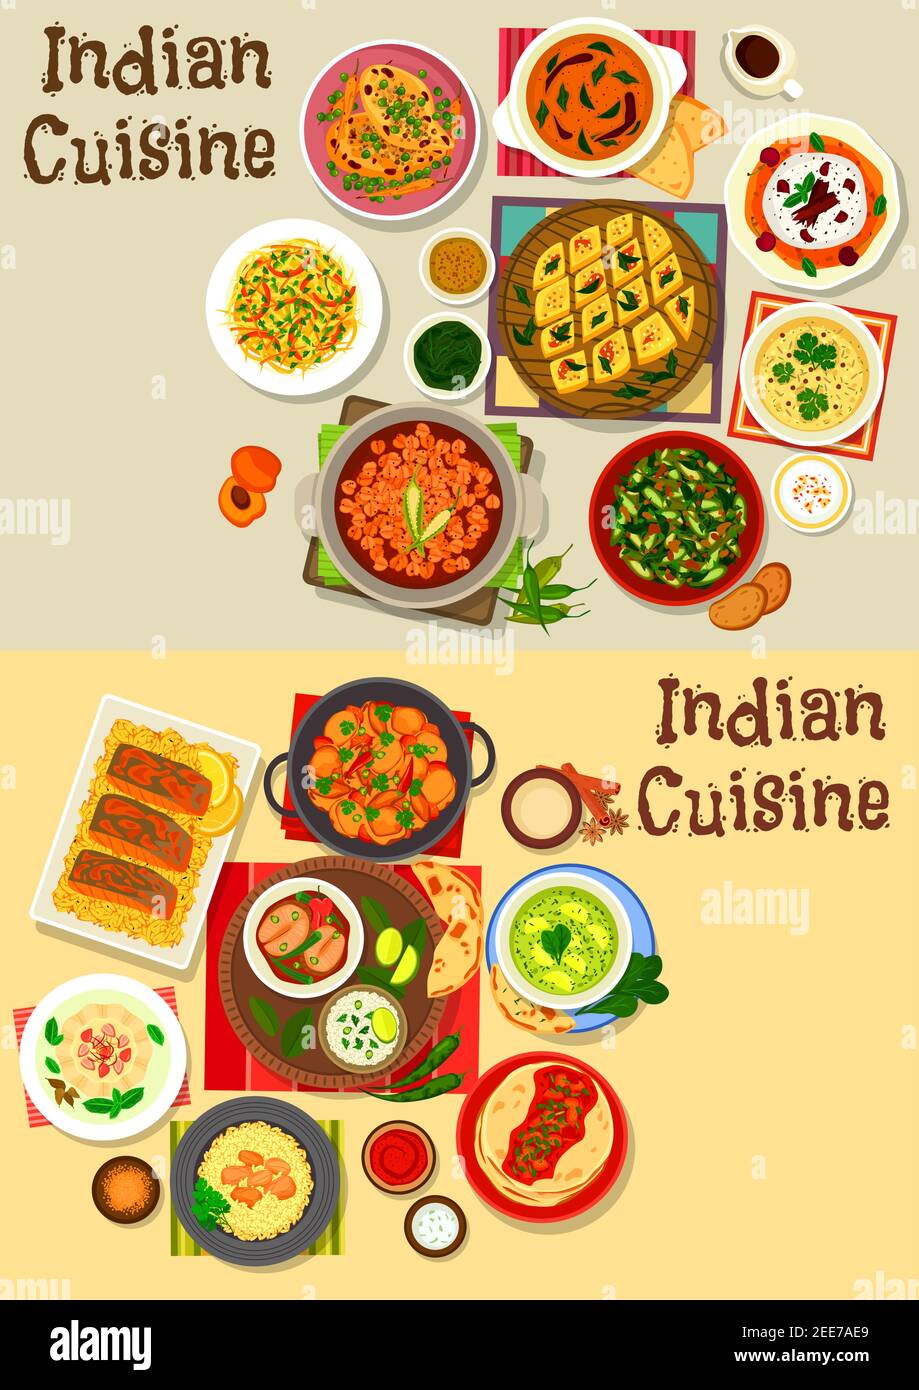 Indian cuisine healthy dinner icon set with chicken, fish and chickpea curry with rice, vegetable salad, lentil and tomato chutney, chilli potato stew Stock Vector